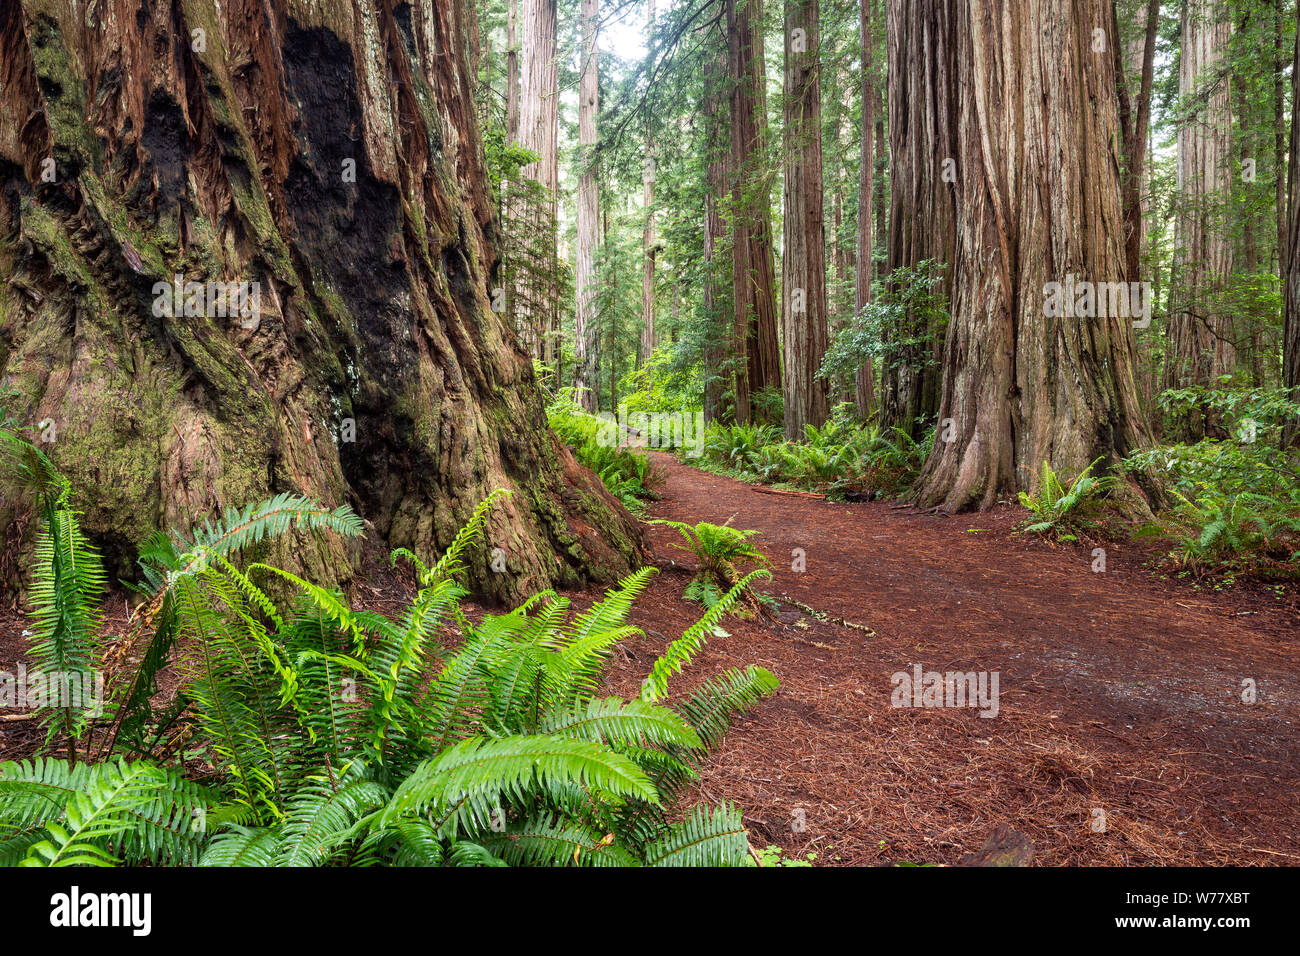 CA03453-00...CALIFORNIA - Stout Grove in Jediah Smith Redwoods State Park along the Redwood Coast. Stock Photo